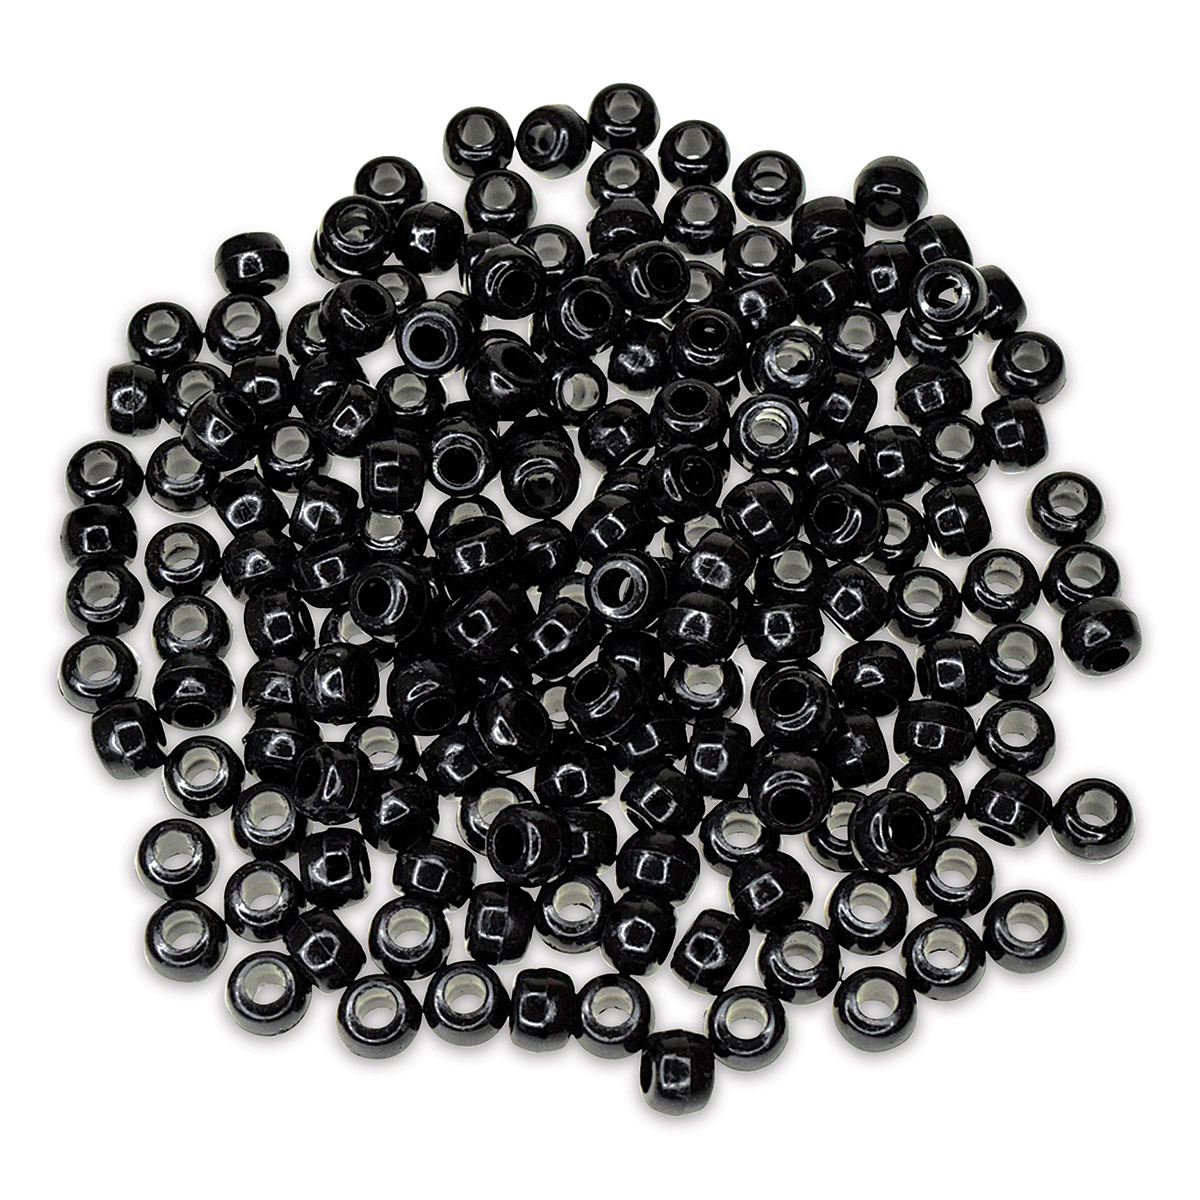 Craft Medley Barrel Pony Beads - Black, Package of 175 - image 1 of 2